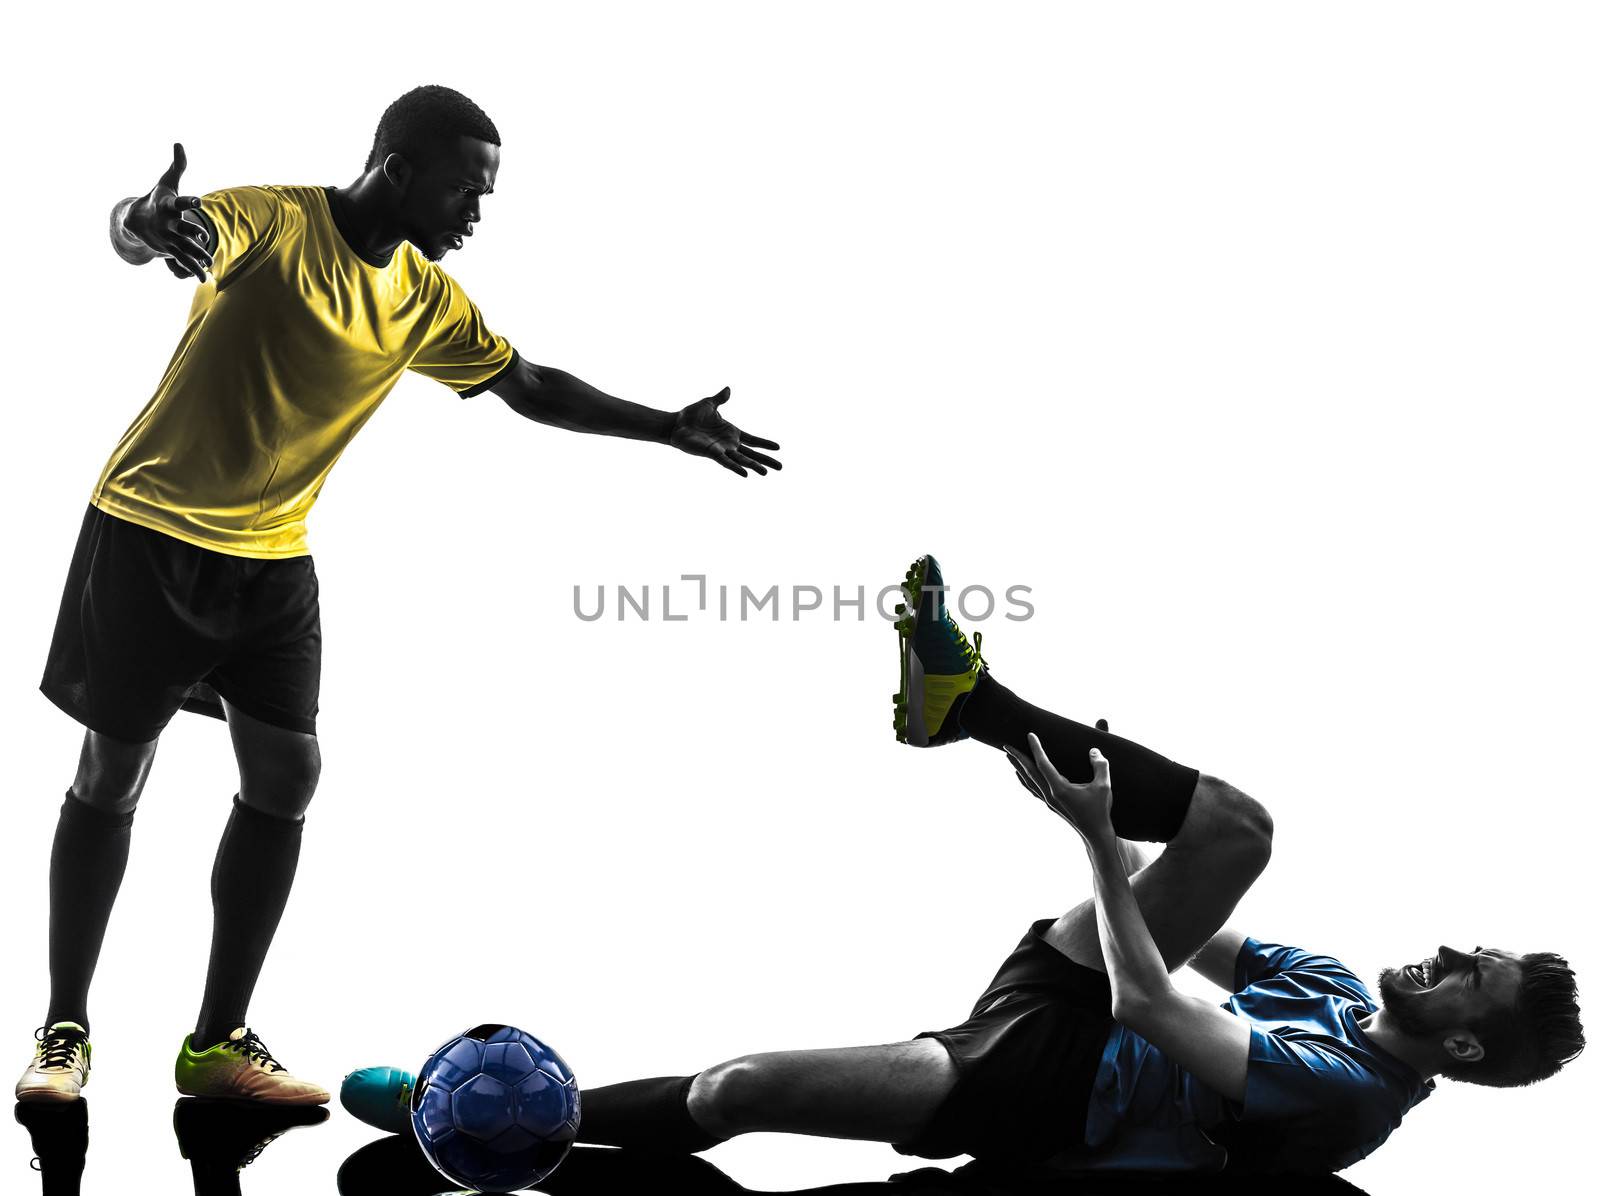 two men soccer player playing football competition complaining foul in silhouette on white background